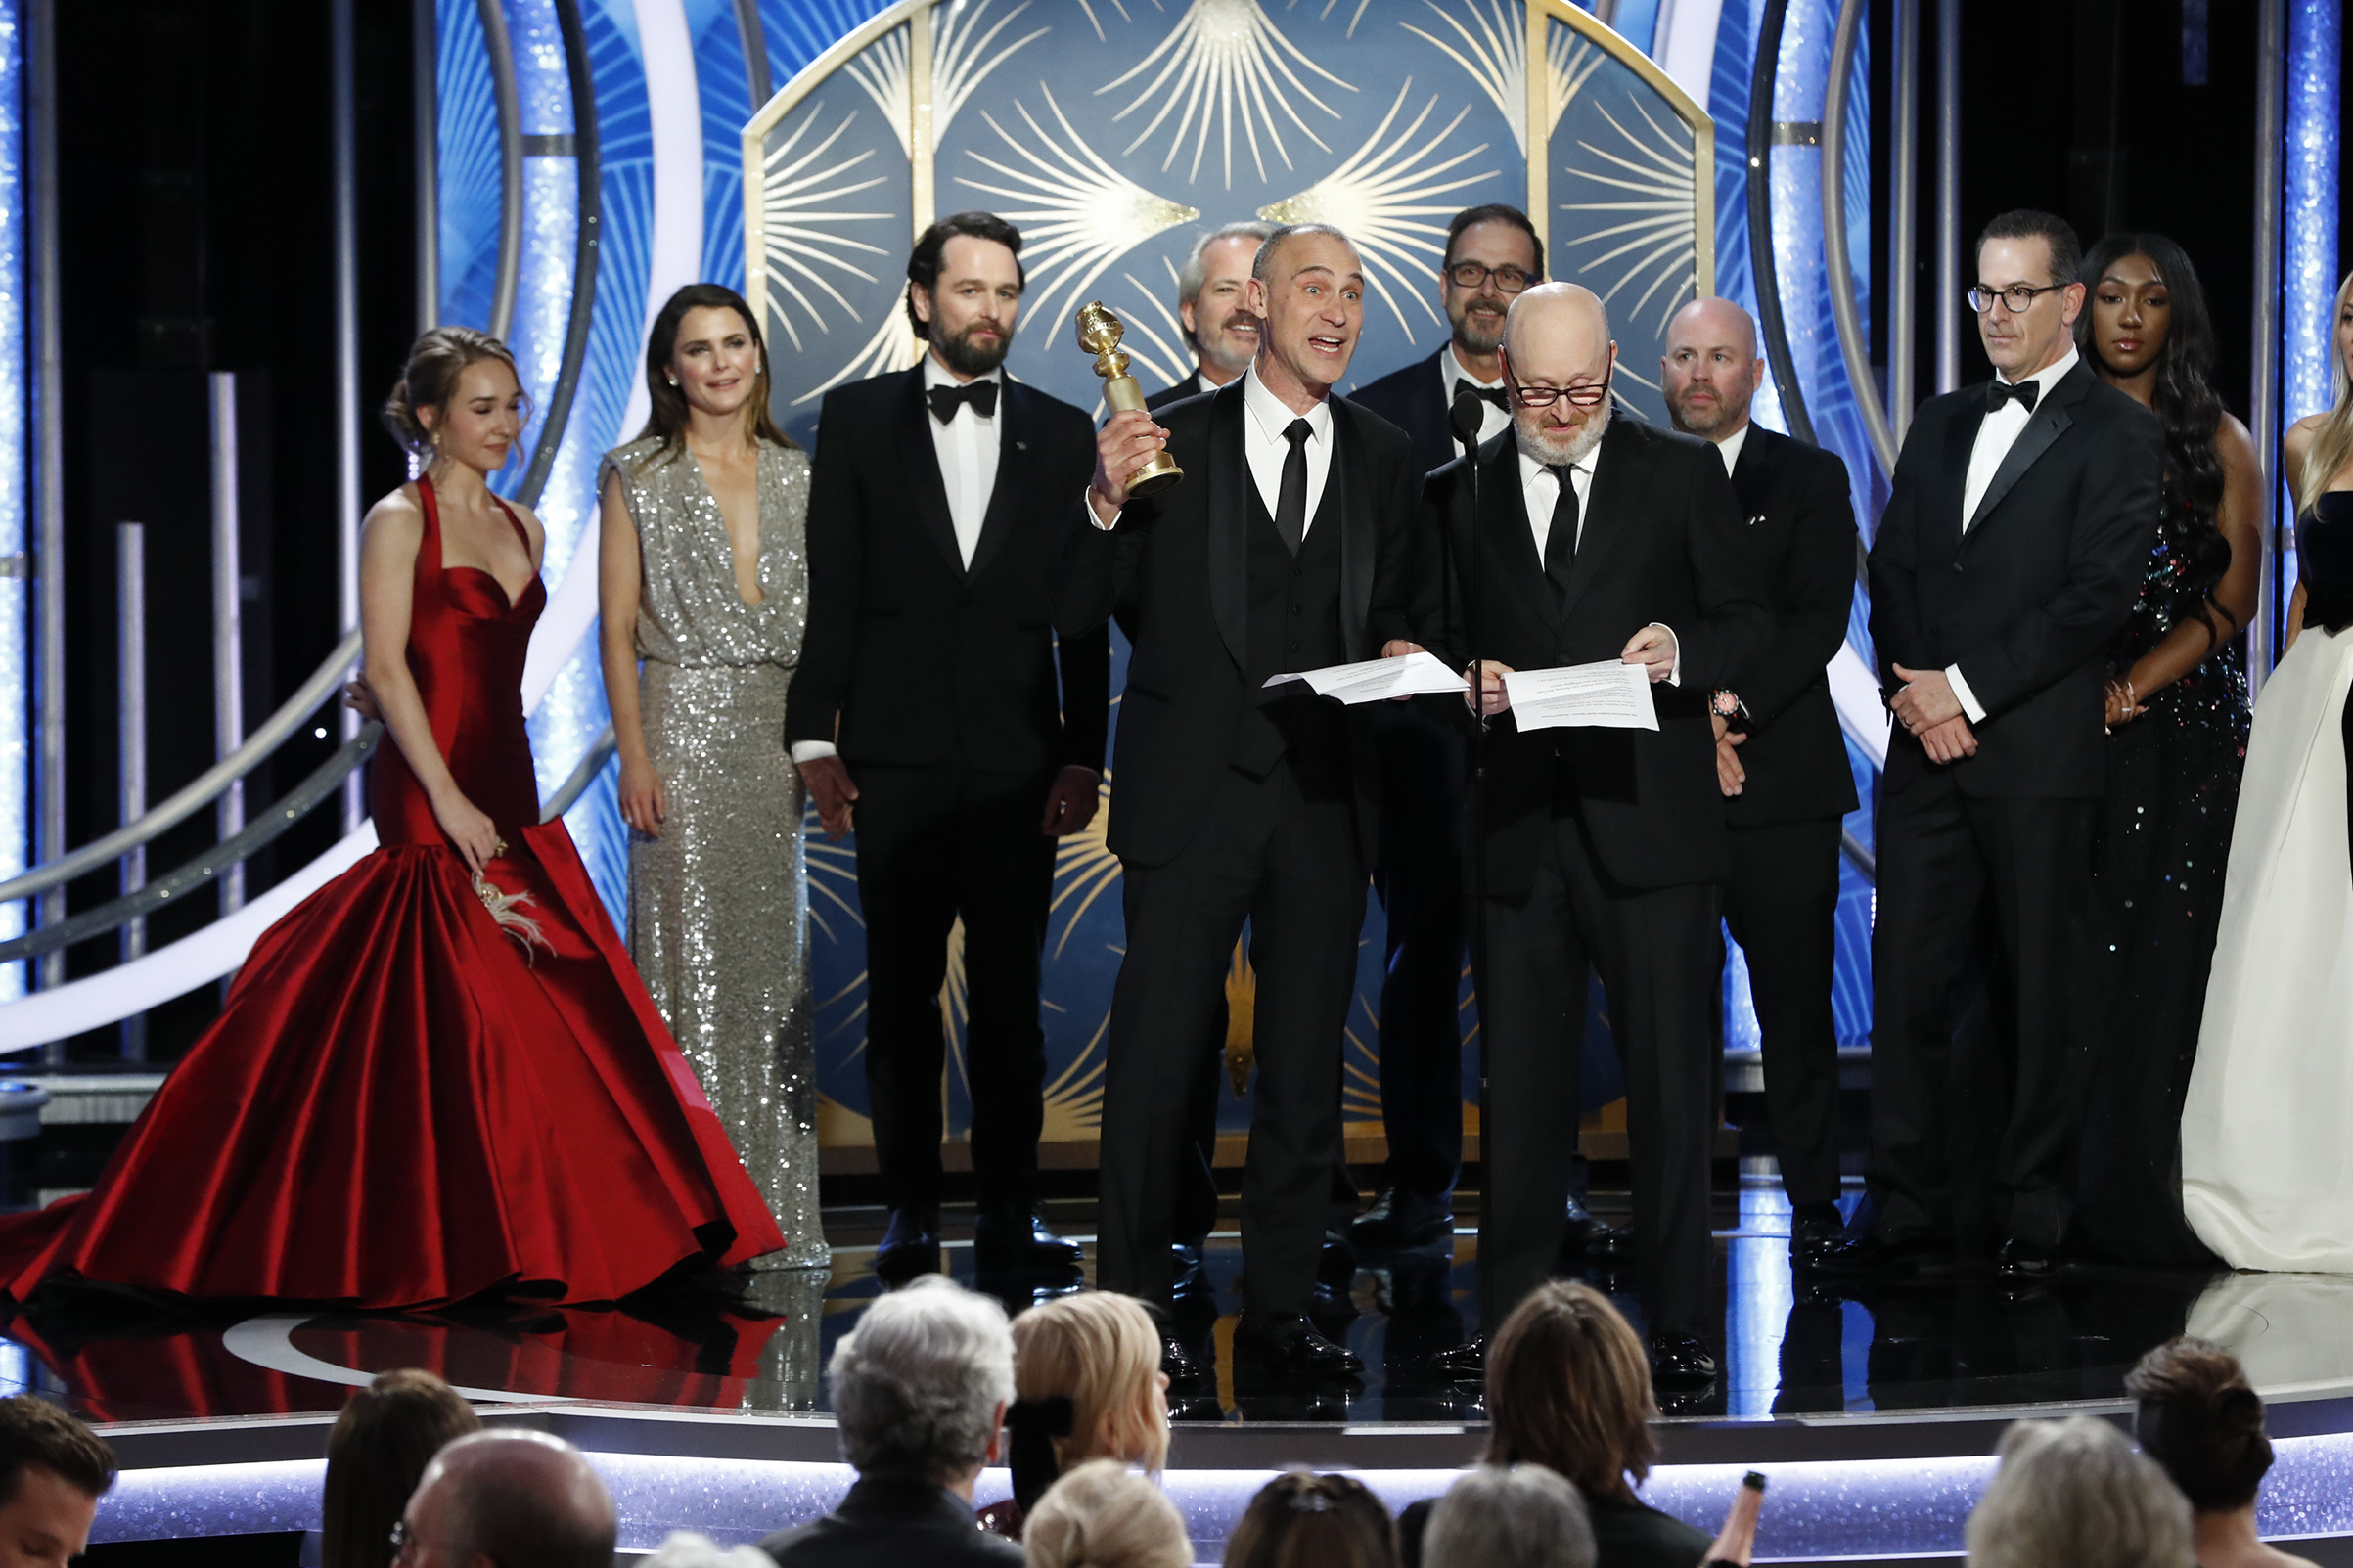 Joe Weinberg (R) from “The Americans” accept the Best Television Series – Drama award onstage during the 76th Annual Golden Globe Awards. (NBCUniversal/Getty Images)